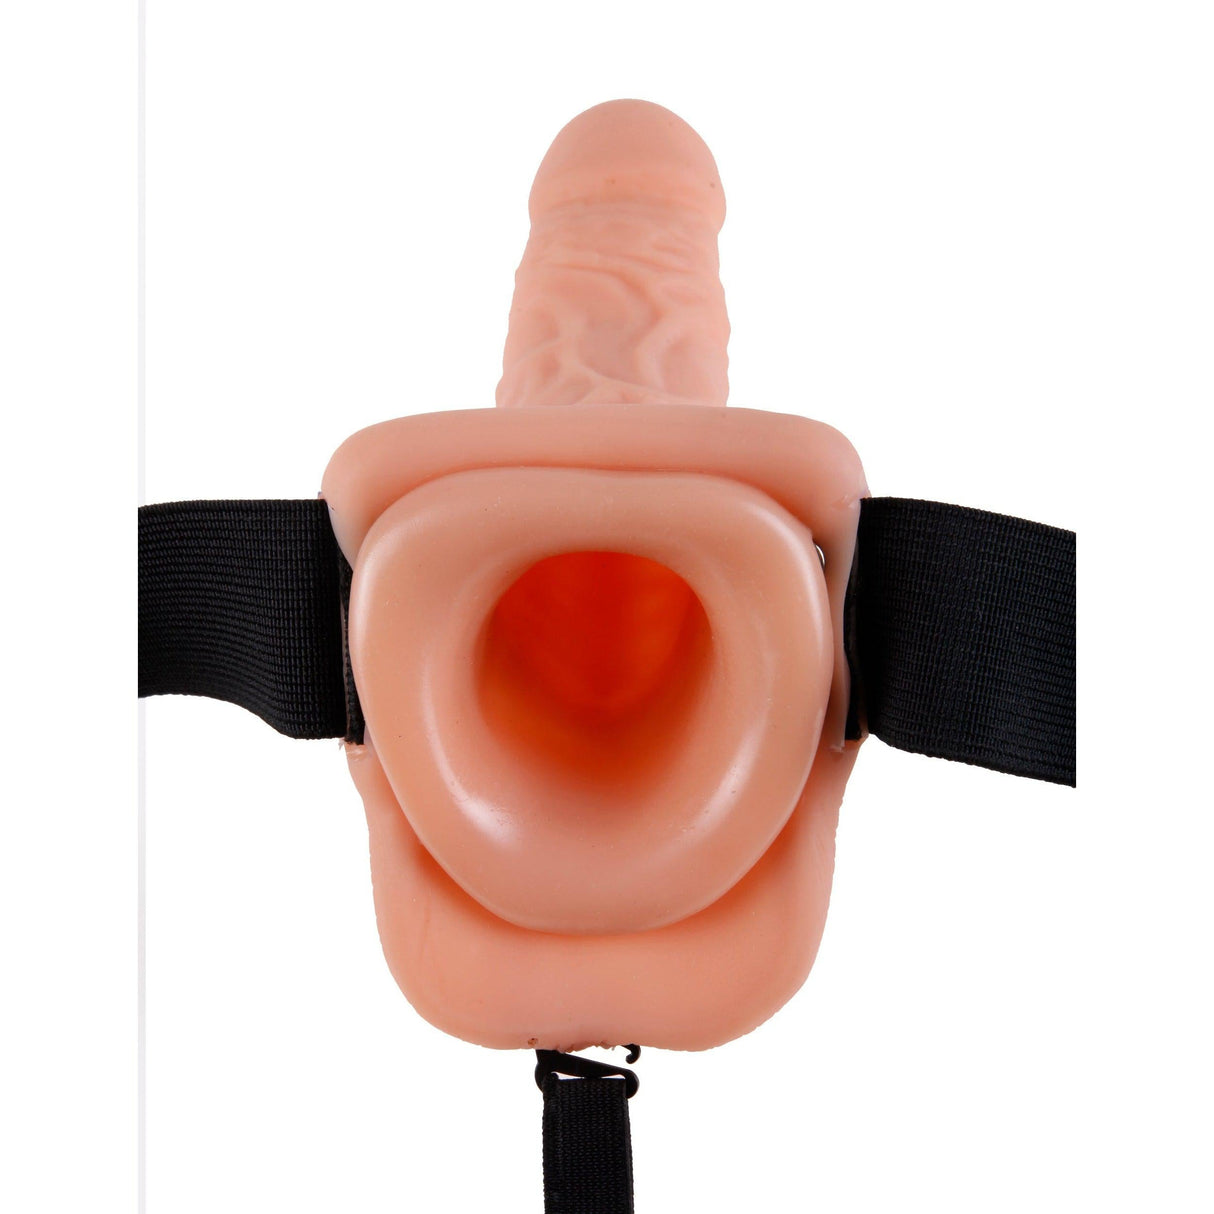 Fetish Fantasy Series 7 Inch Hollow Strap-On With Balls